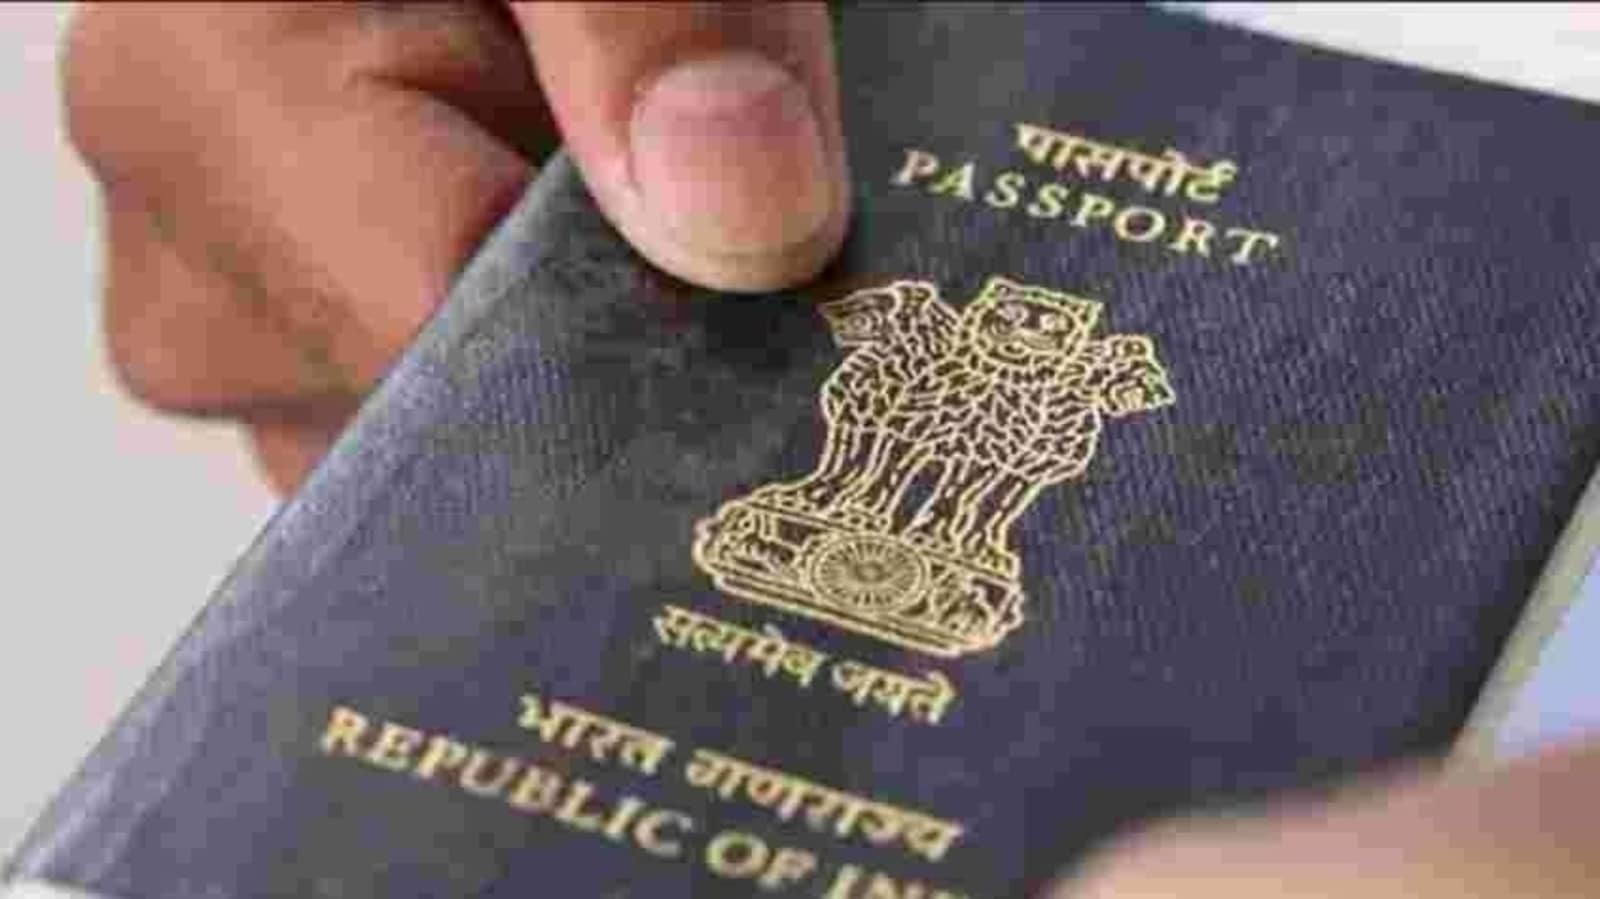 World's most powerful passports Japan tops list. Find out India's rank